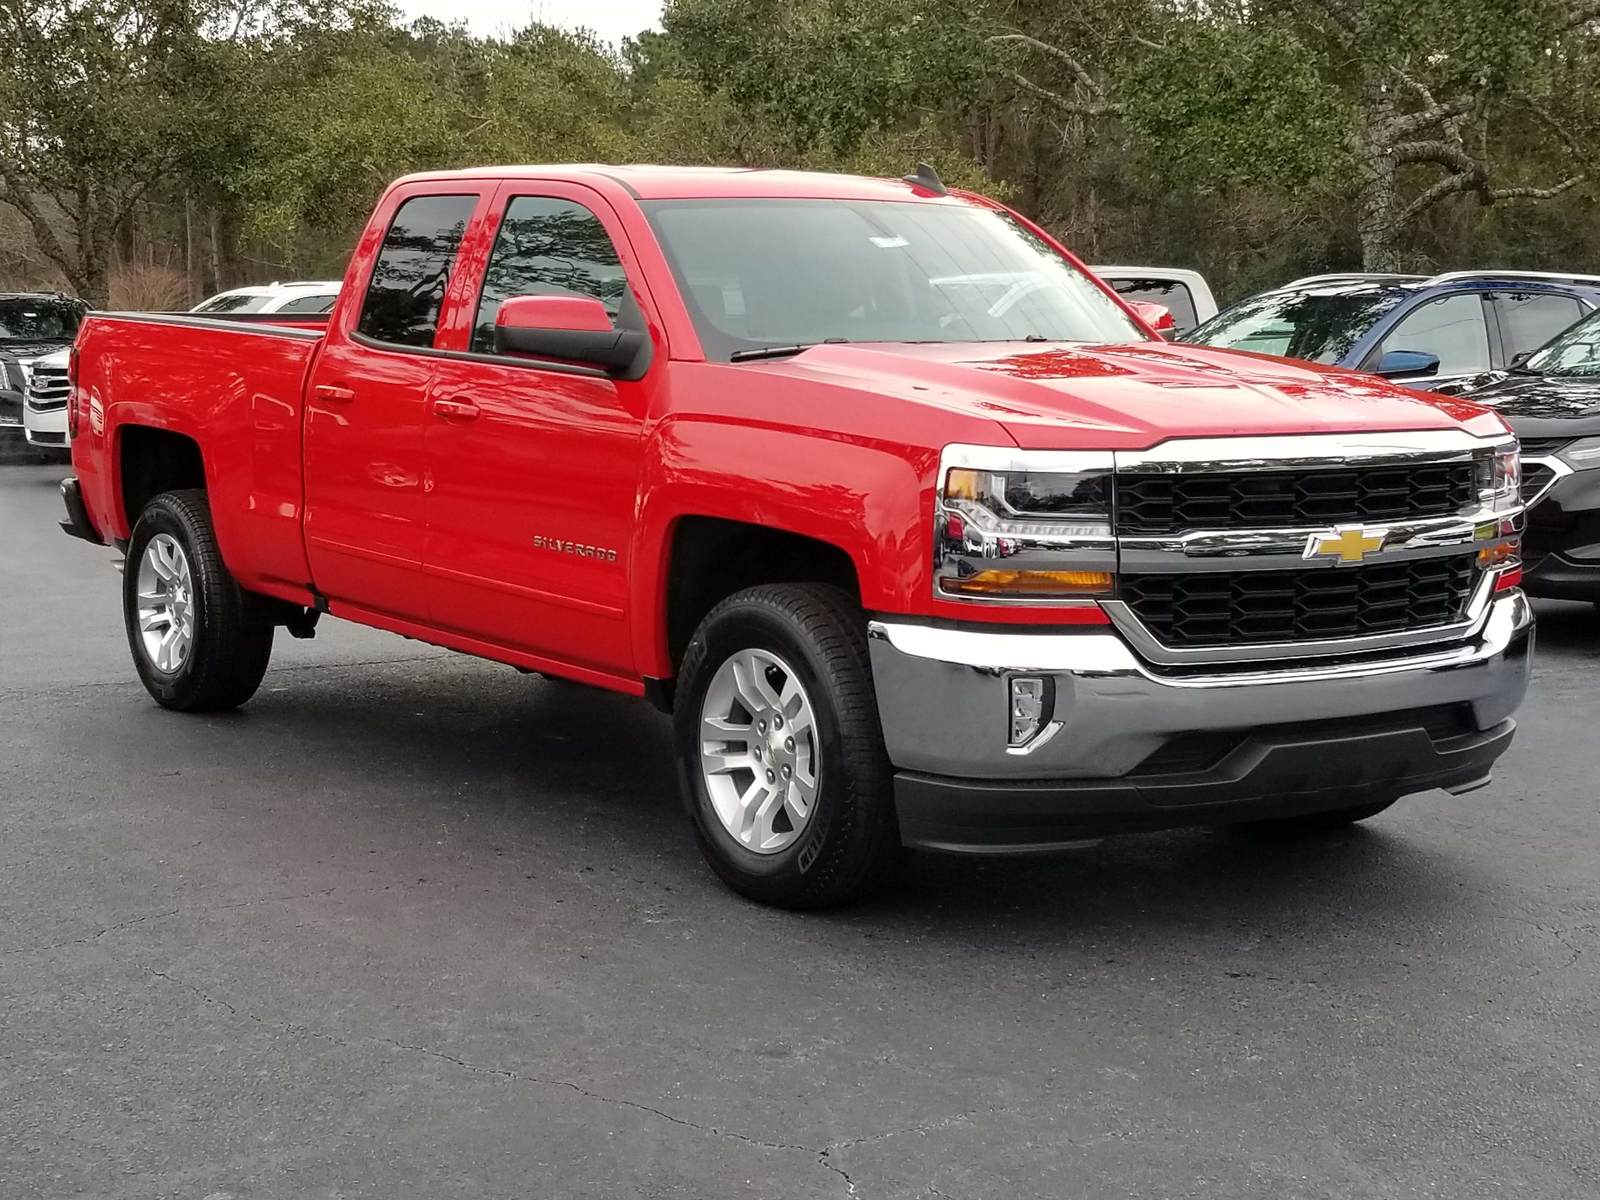 new-2019-chevrolet-silverado-1500-ld-2wd-double-cab-lt-extended-cab